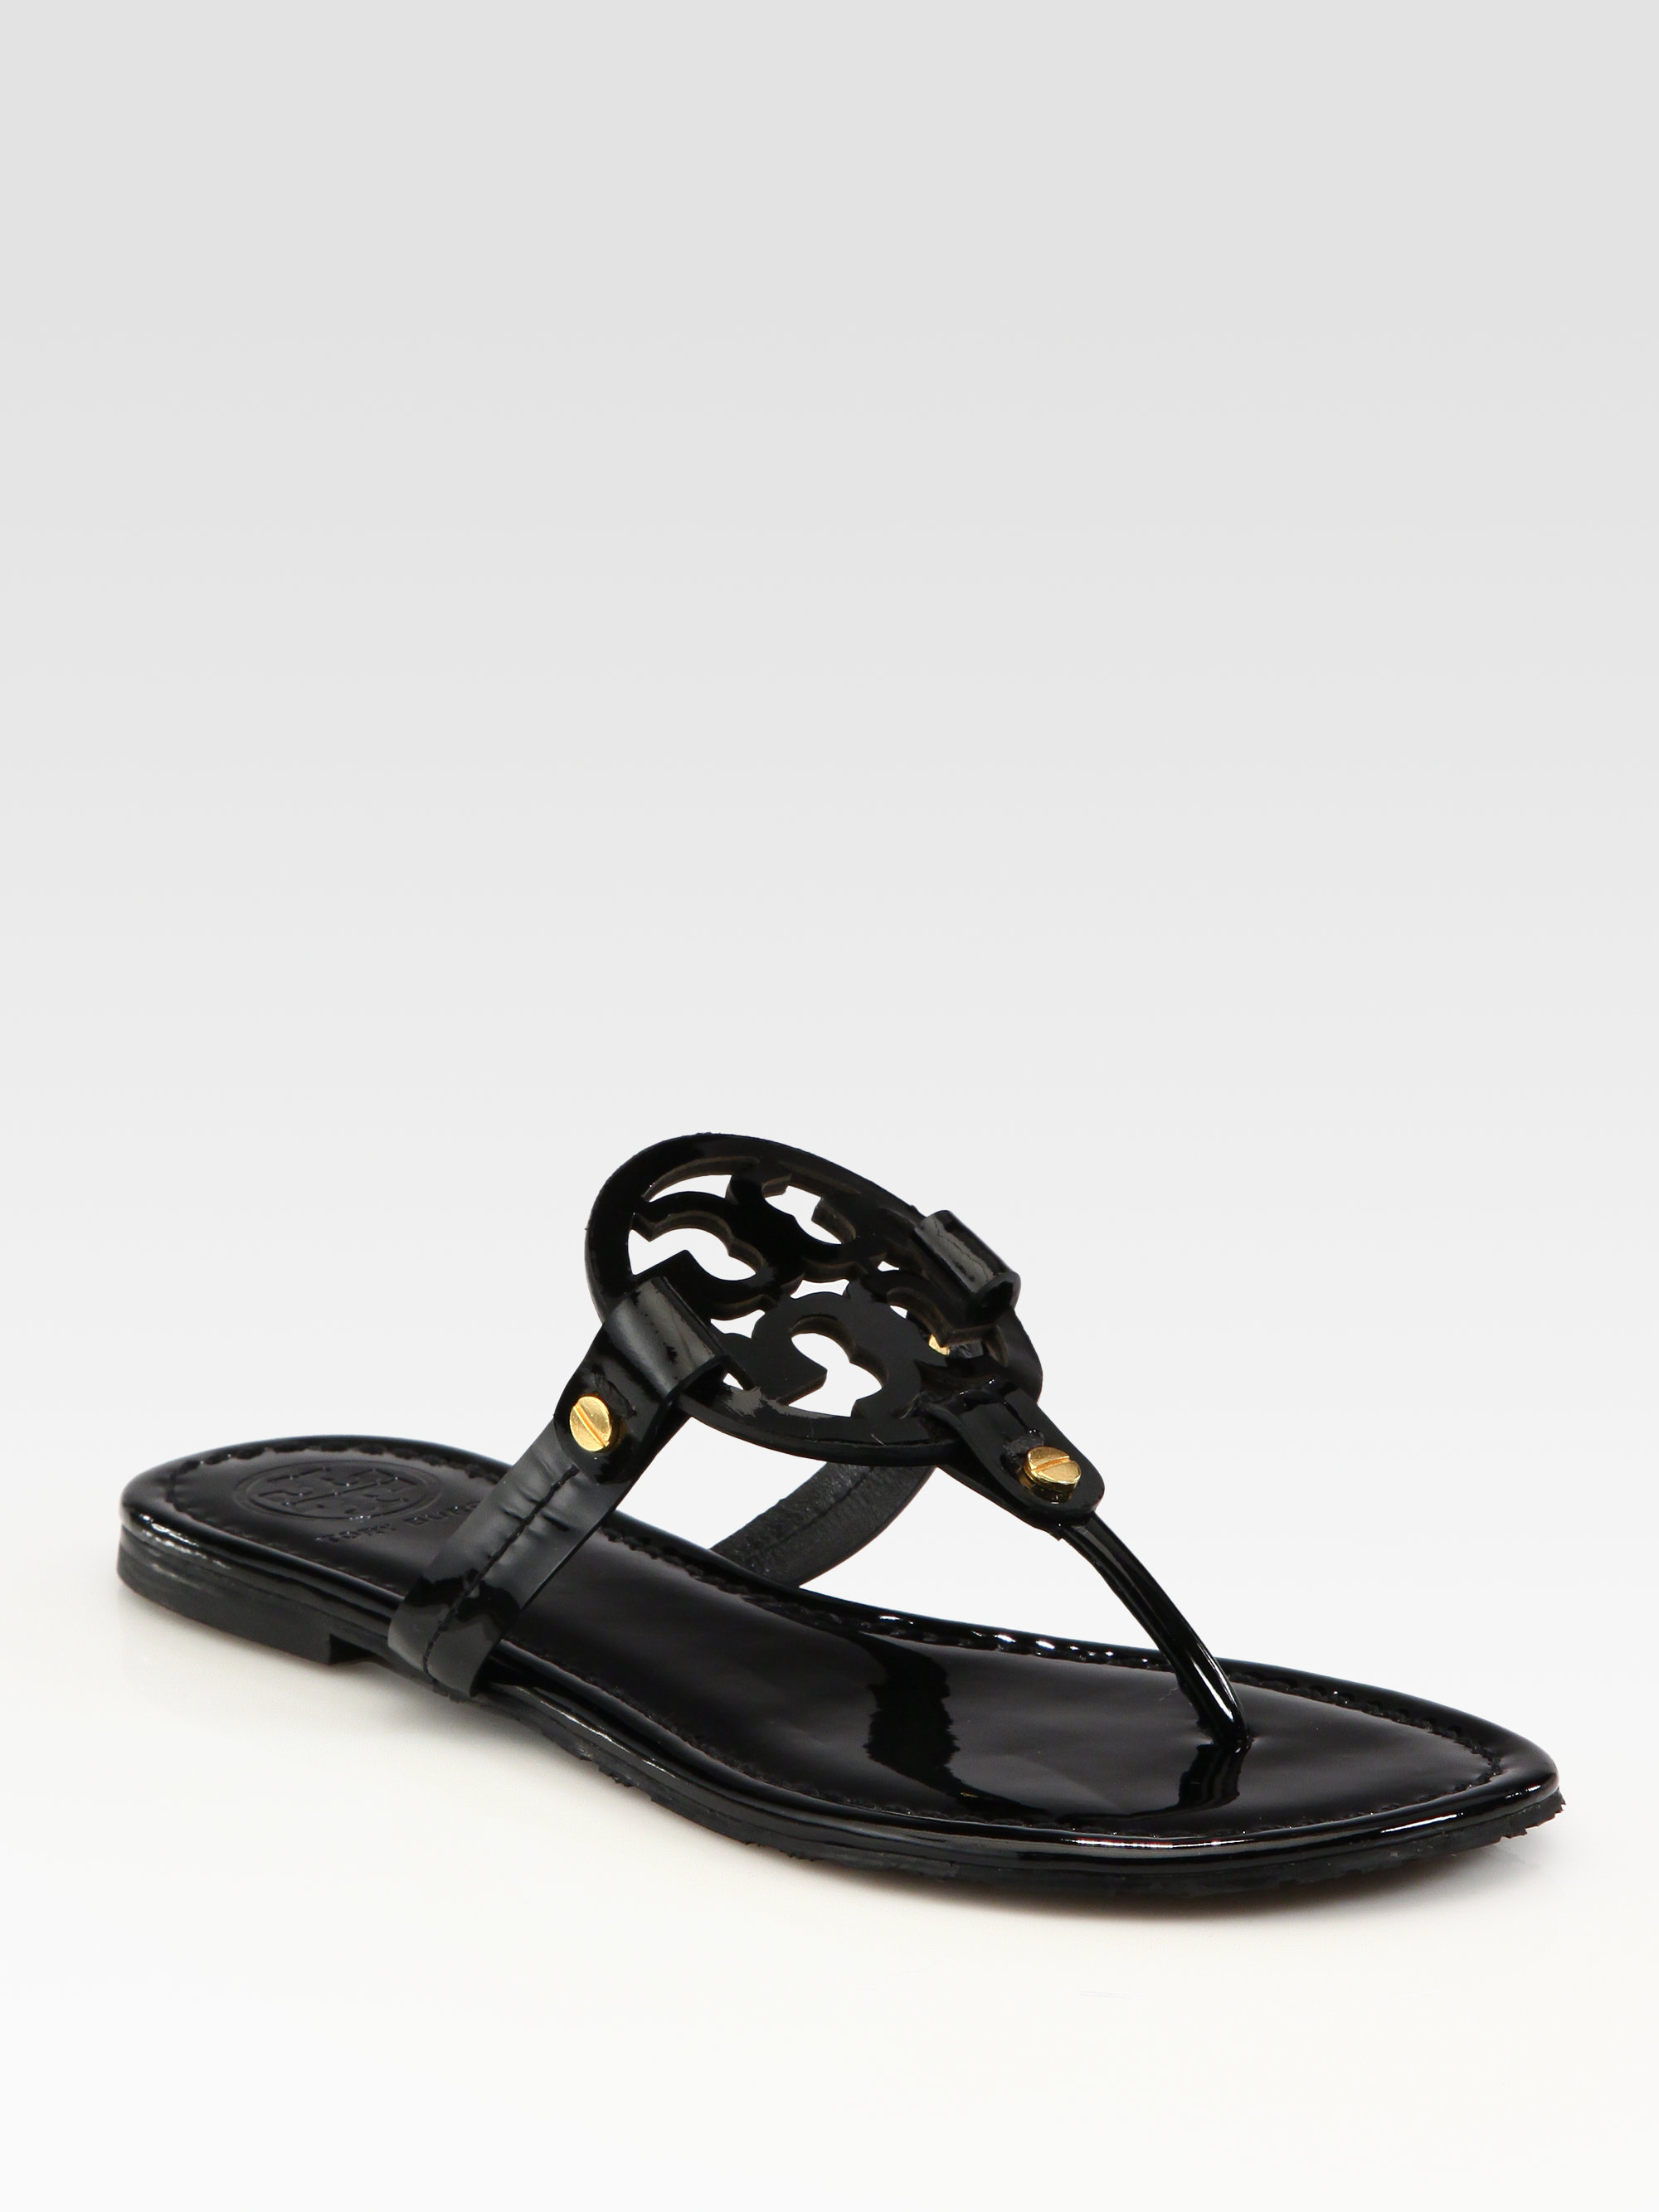 authentic tory burch sandals